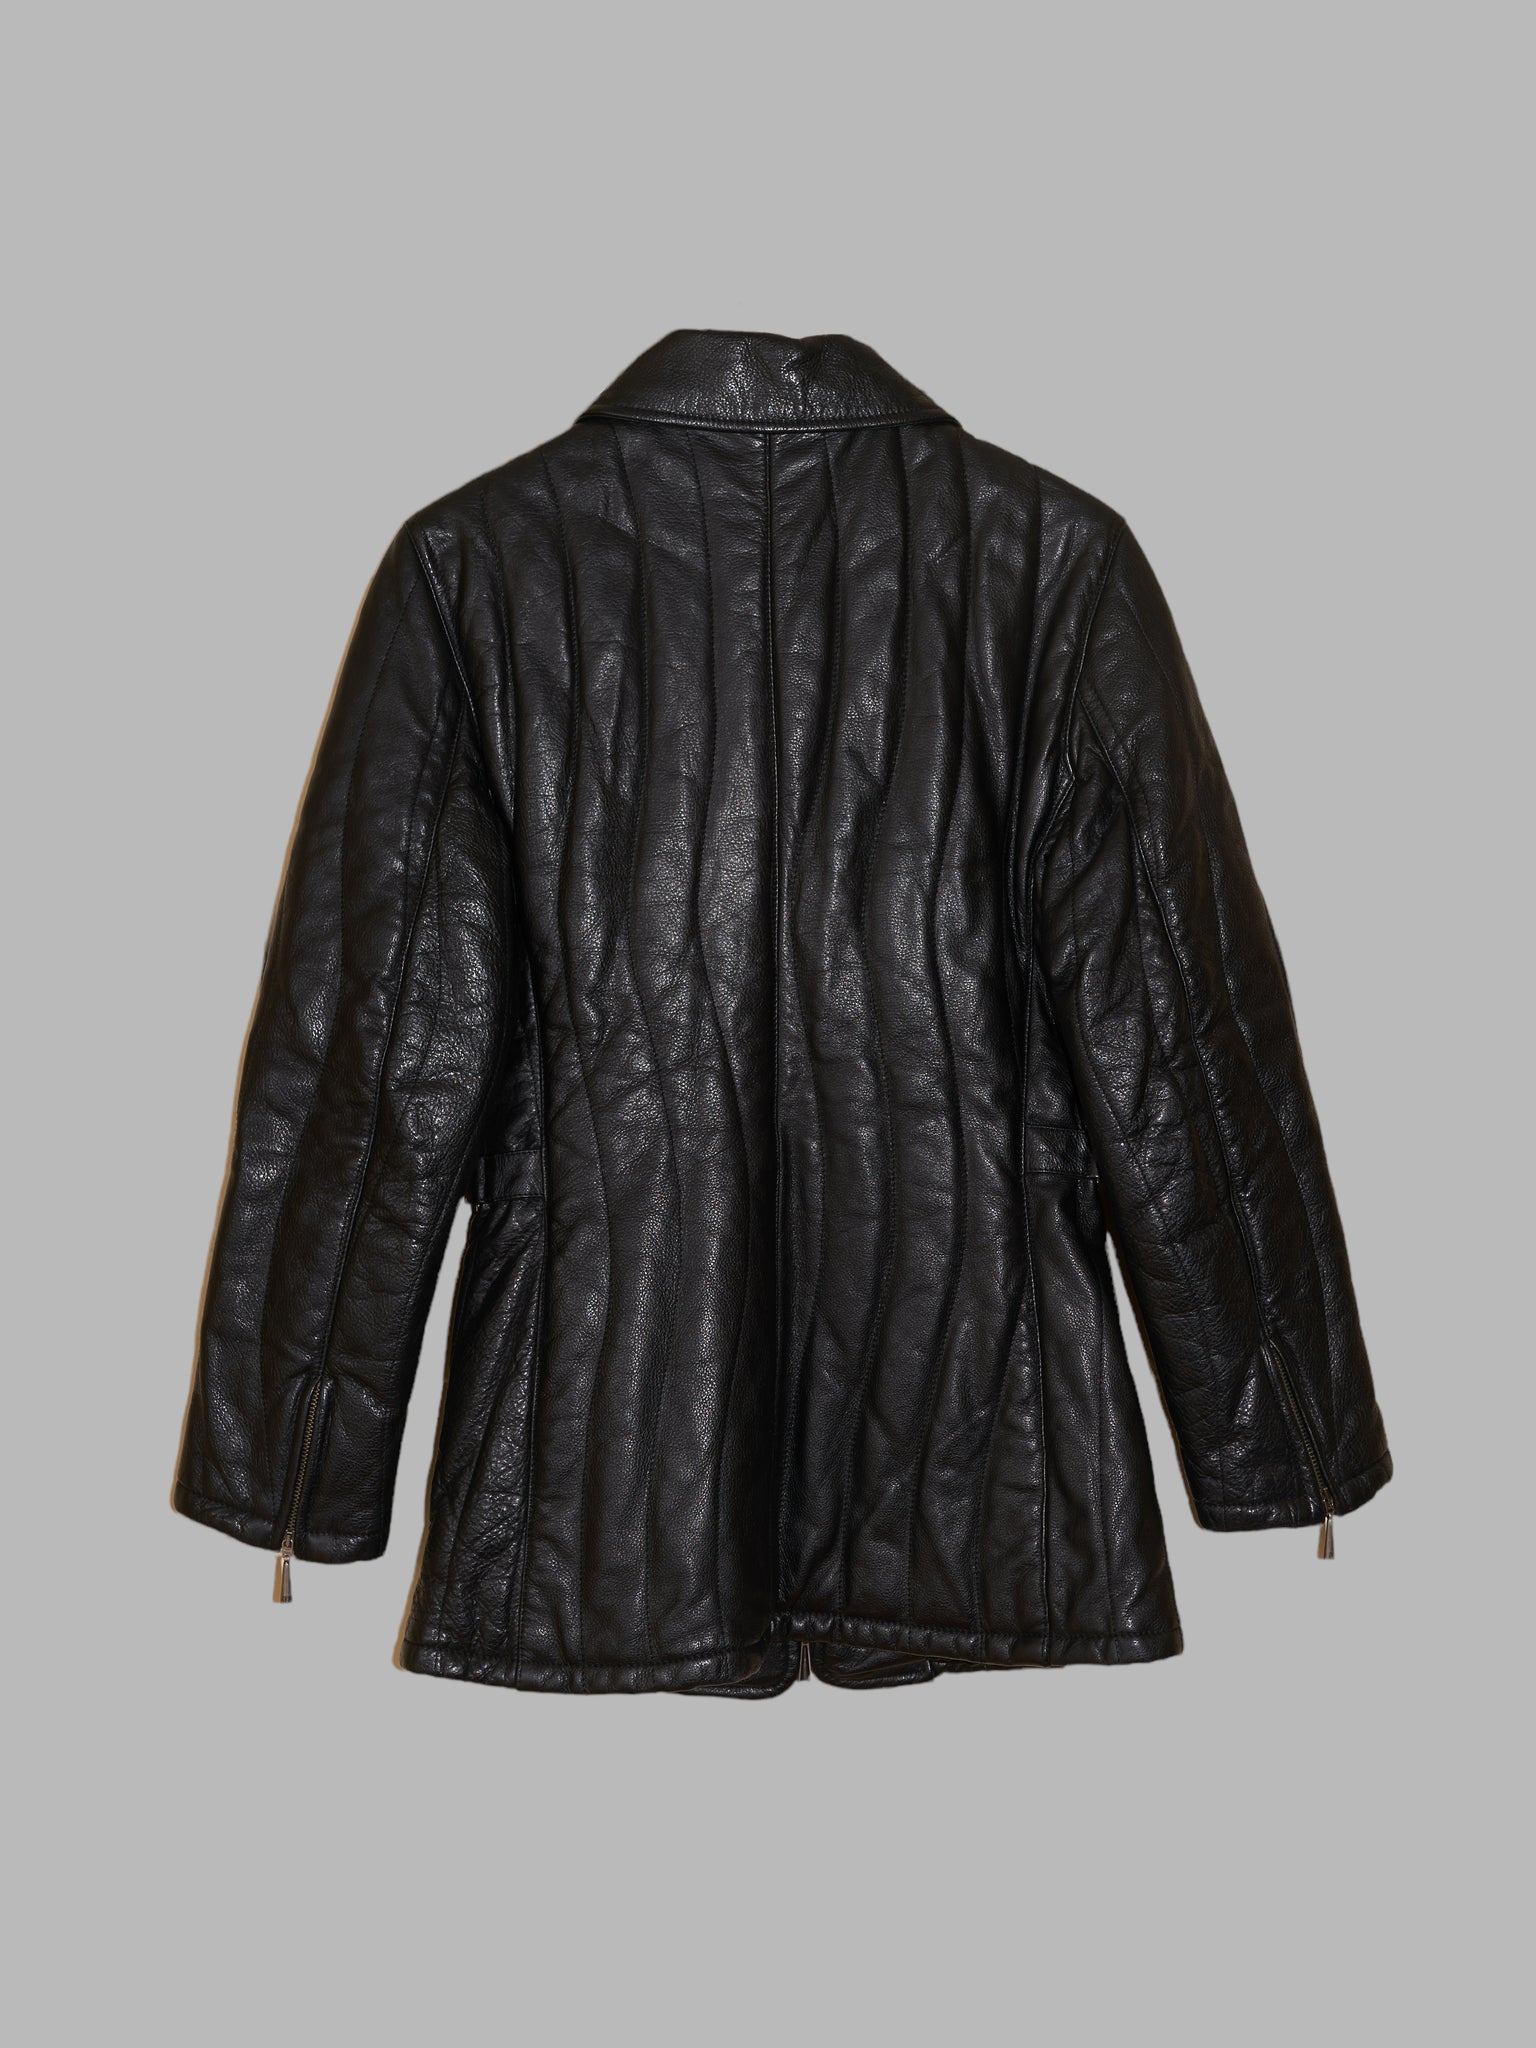 Gianfranco Ferre black zipped leather jacket with undulating channel stitch - S